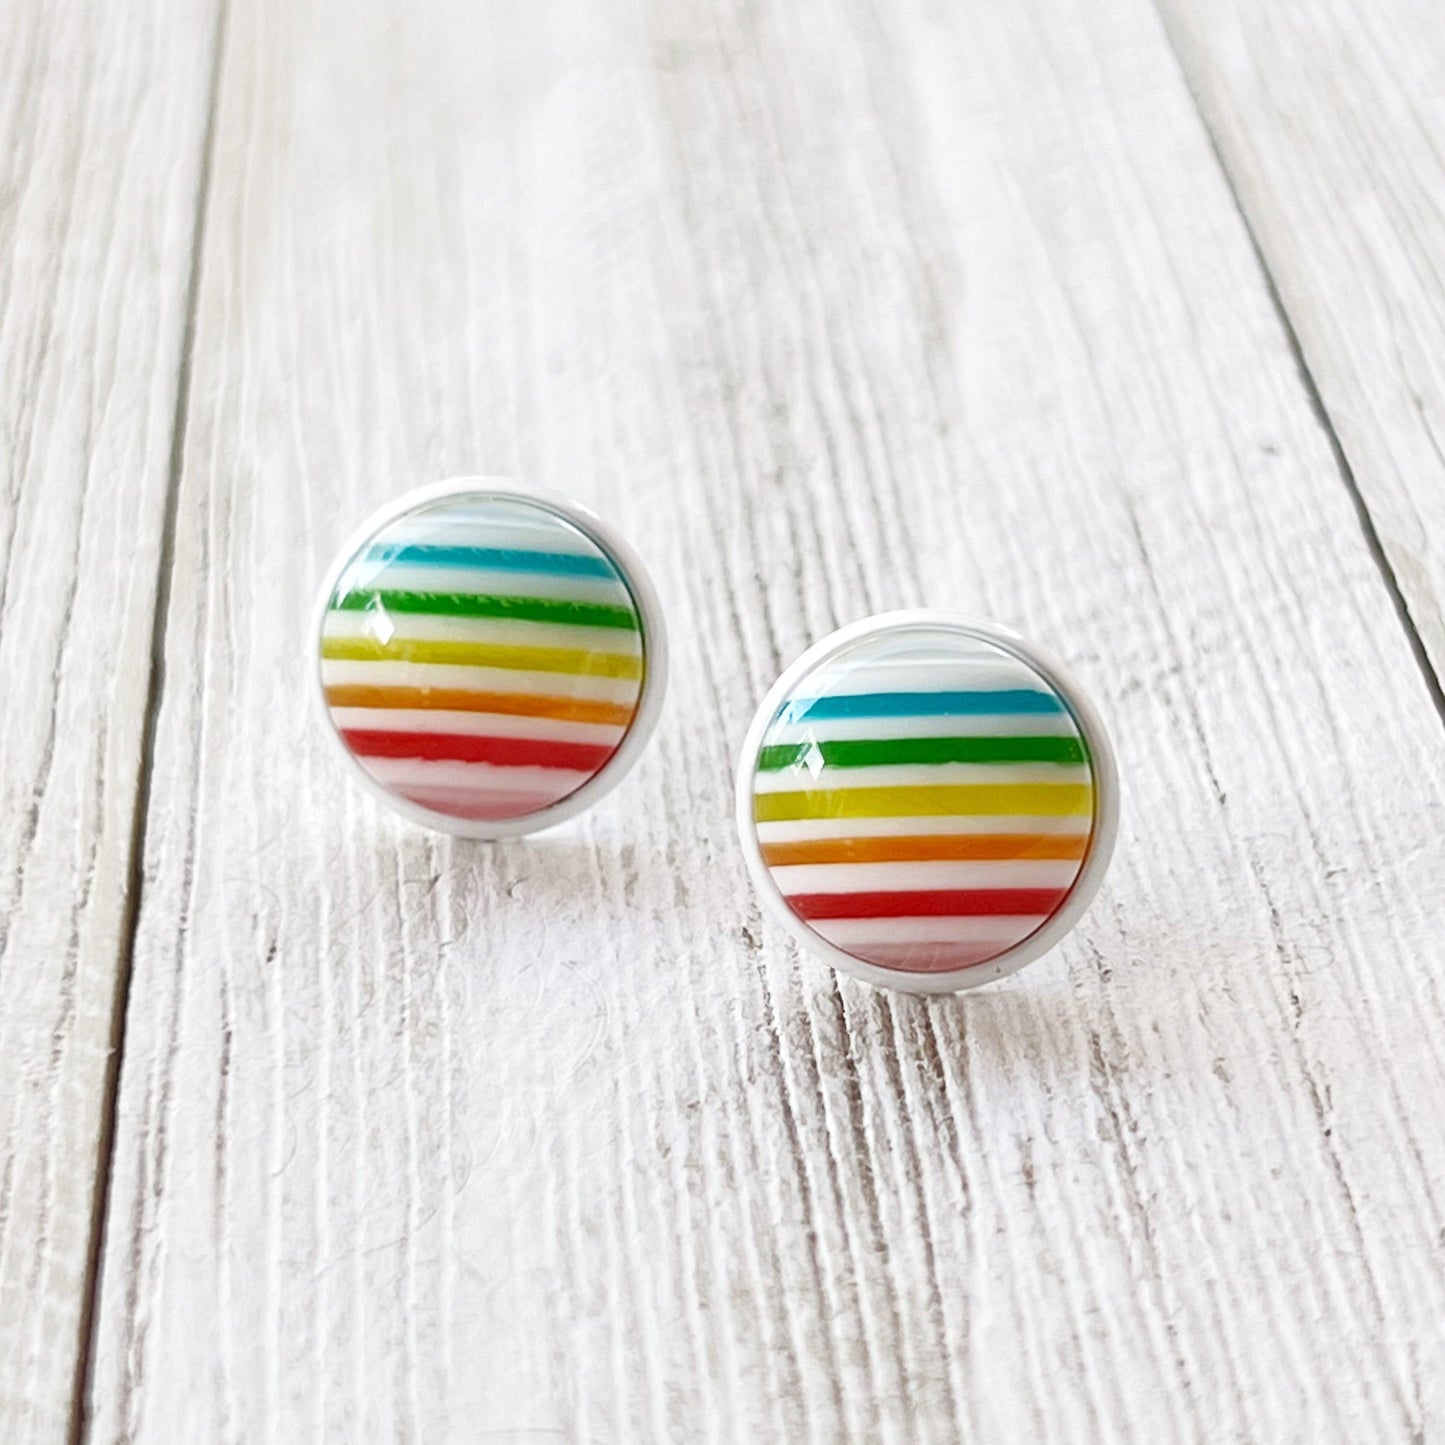 Rainbow Striped Earrings: Vibrant & Playful Accessories for Every Outfit